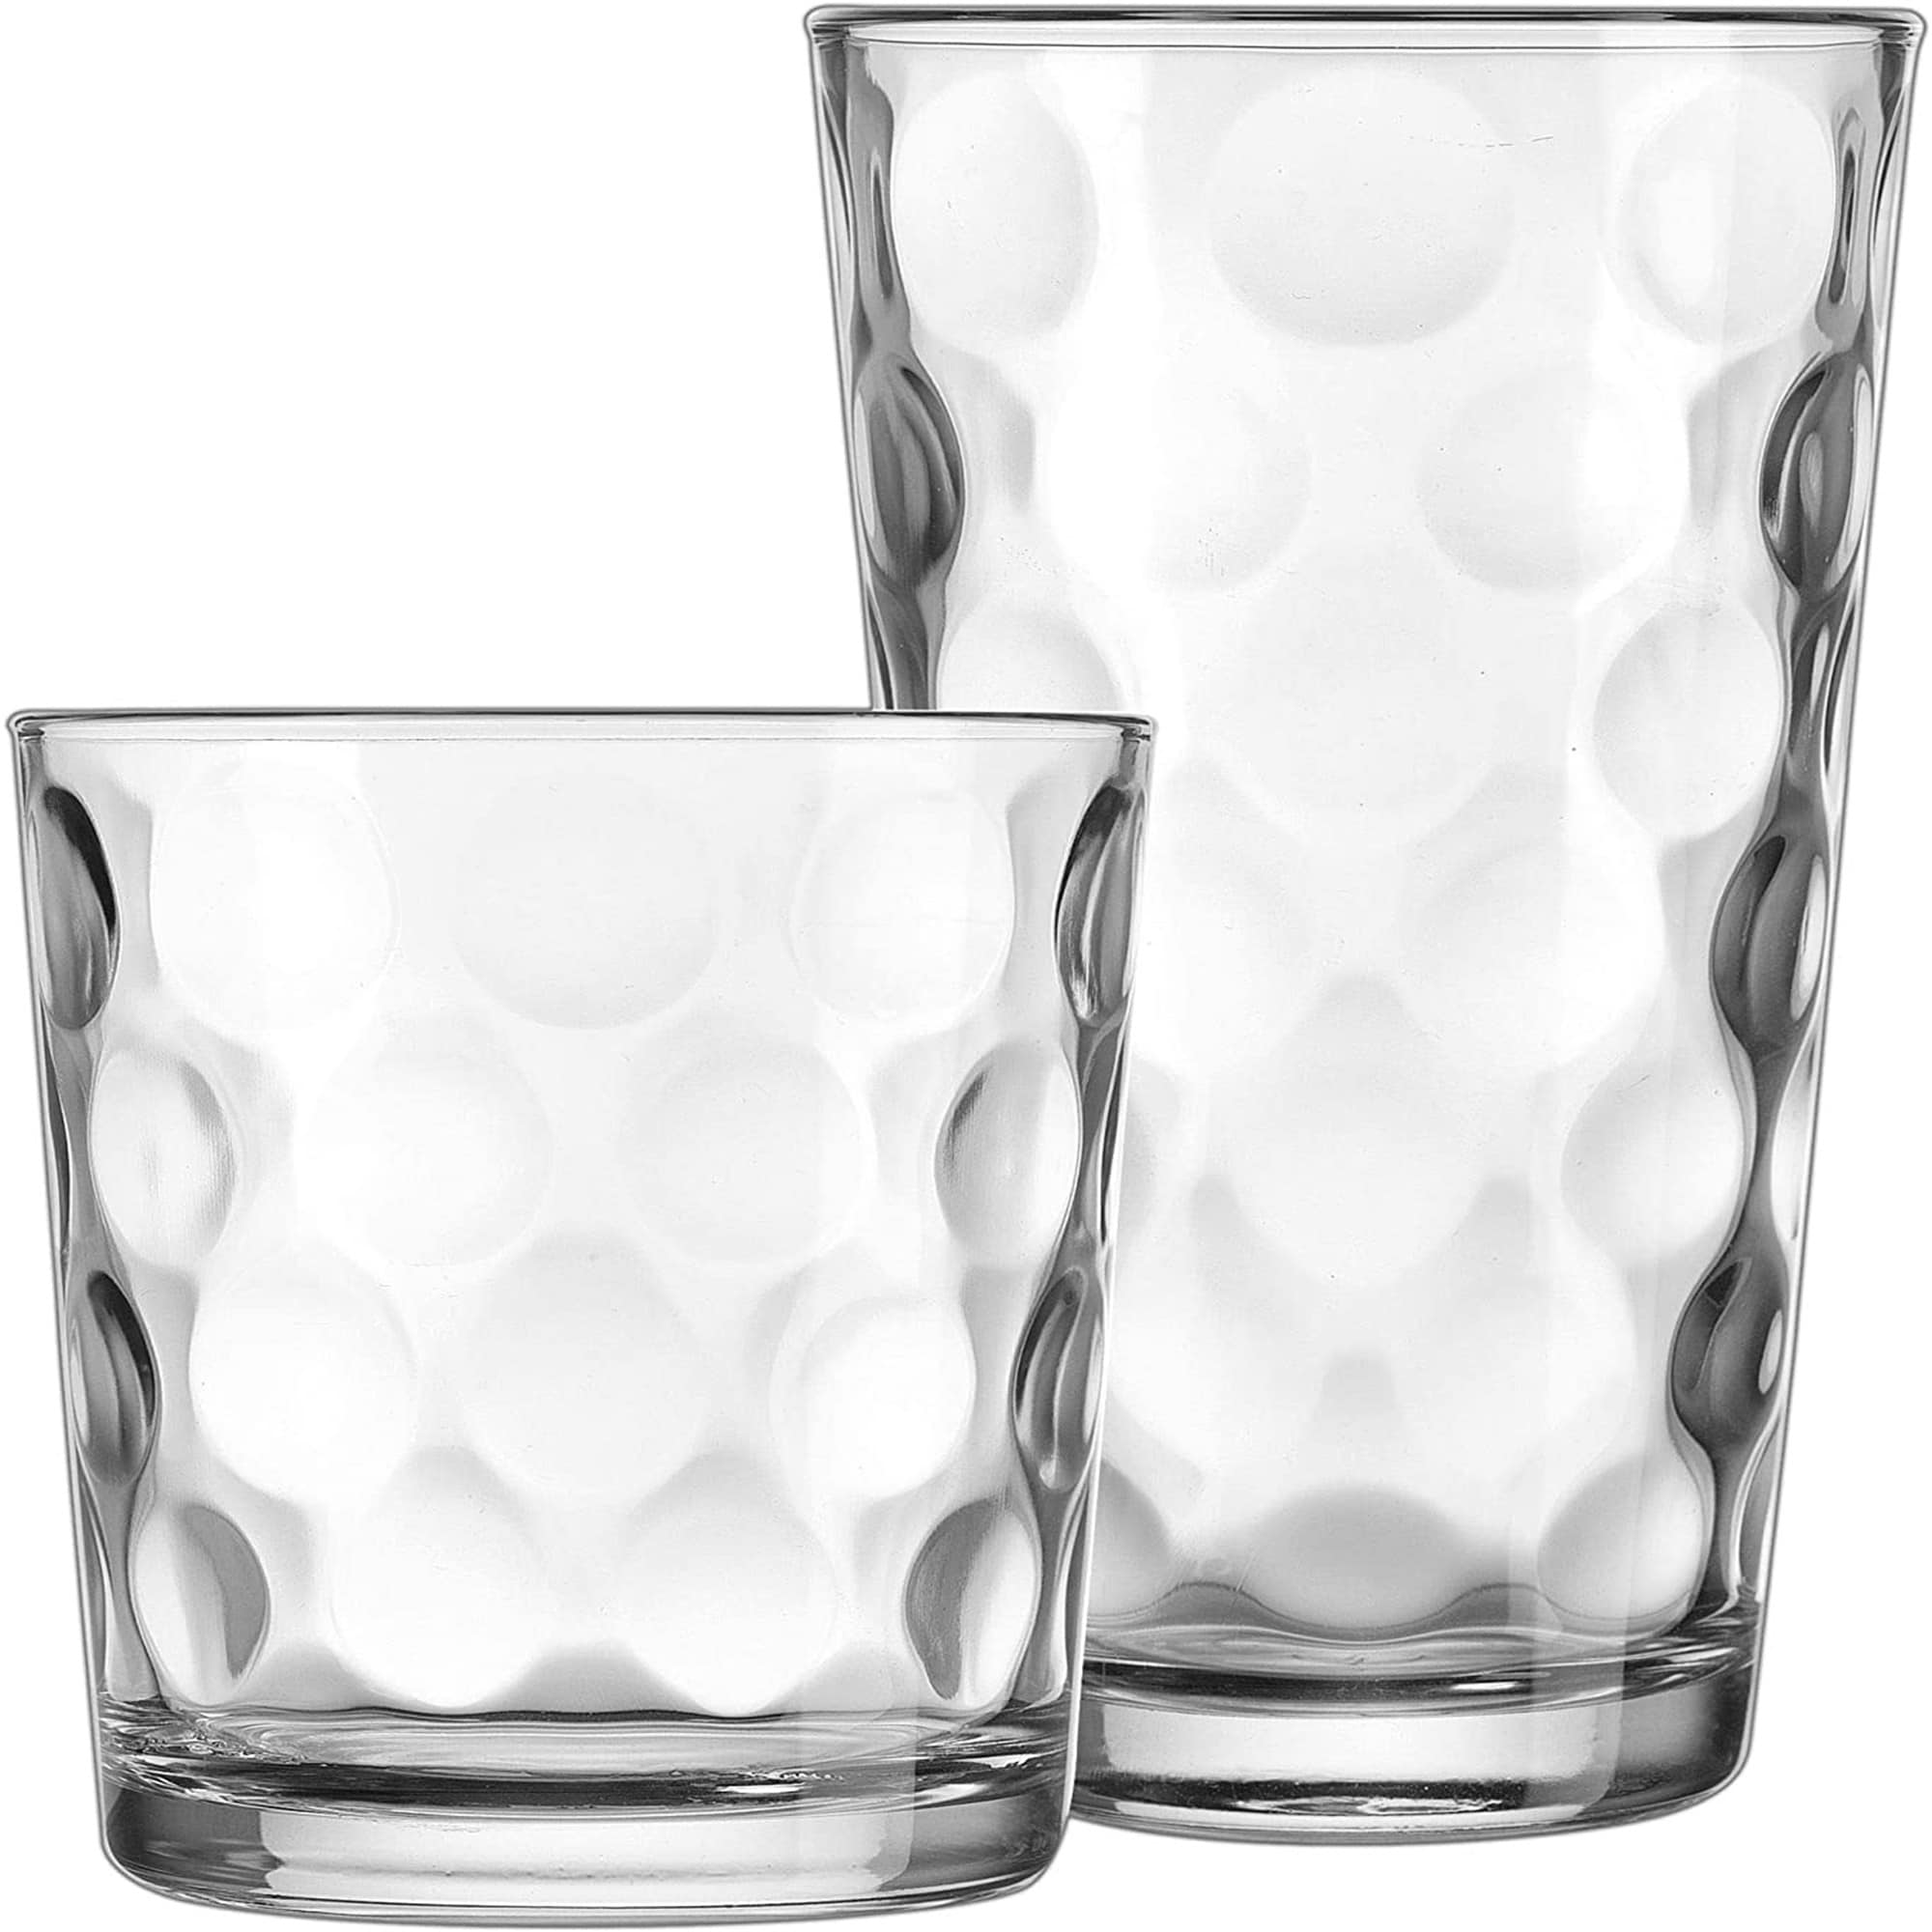 https://ak1.ostkcdn.com/images/products/is/images/direct/78afb31bf076230e6ed5488504262933a97df77d/Modern-Drinking-Glasses-Set%2C-12-Count-Galaxy-Glassware%2C-Includes-6-Cooler-Glasses%2817oz%29-6-DOF-Glasses%2814oz%29.jpg